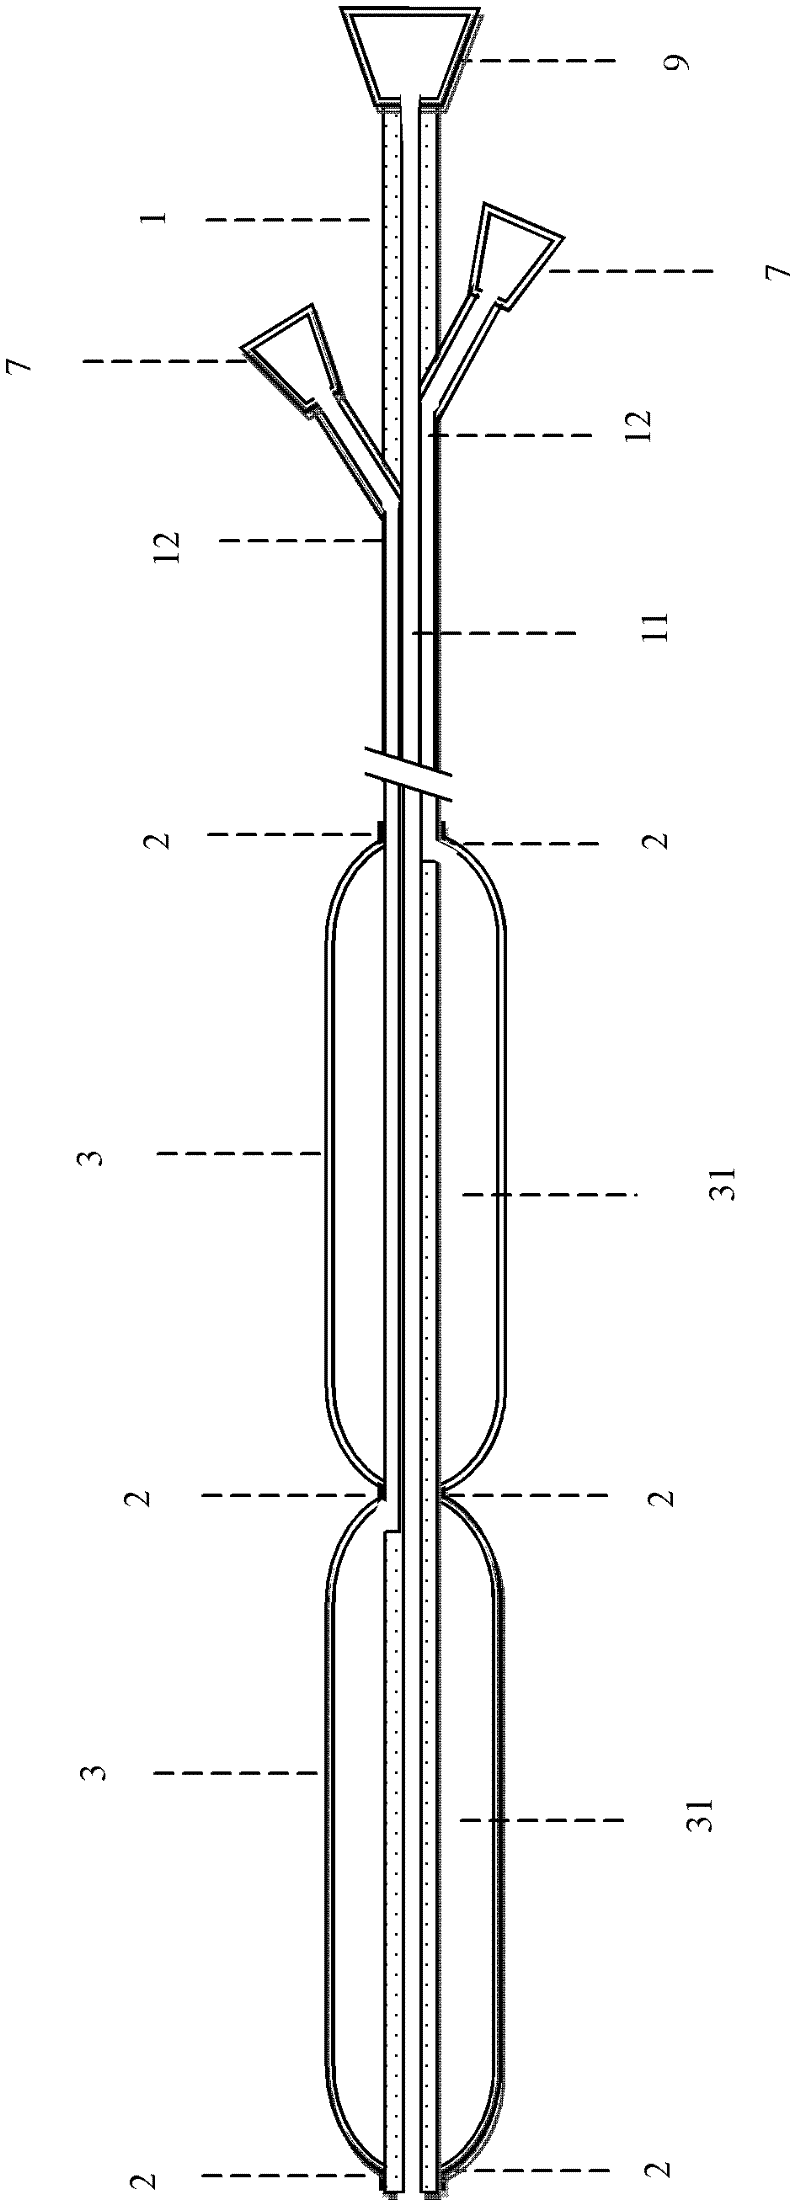 Length adjustable and controllable esophageal balloon catheter